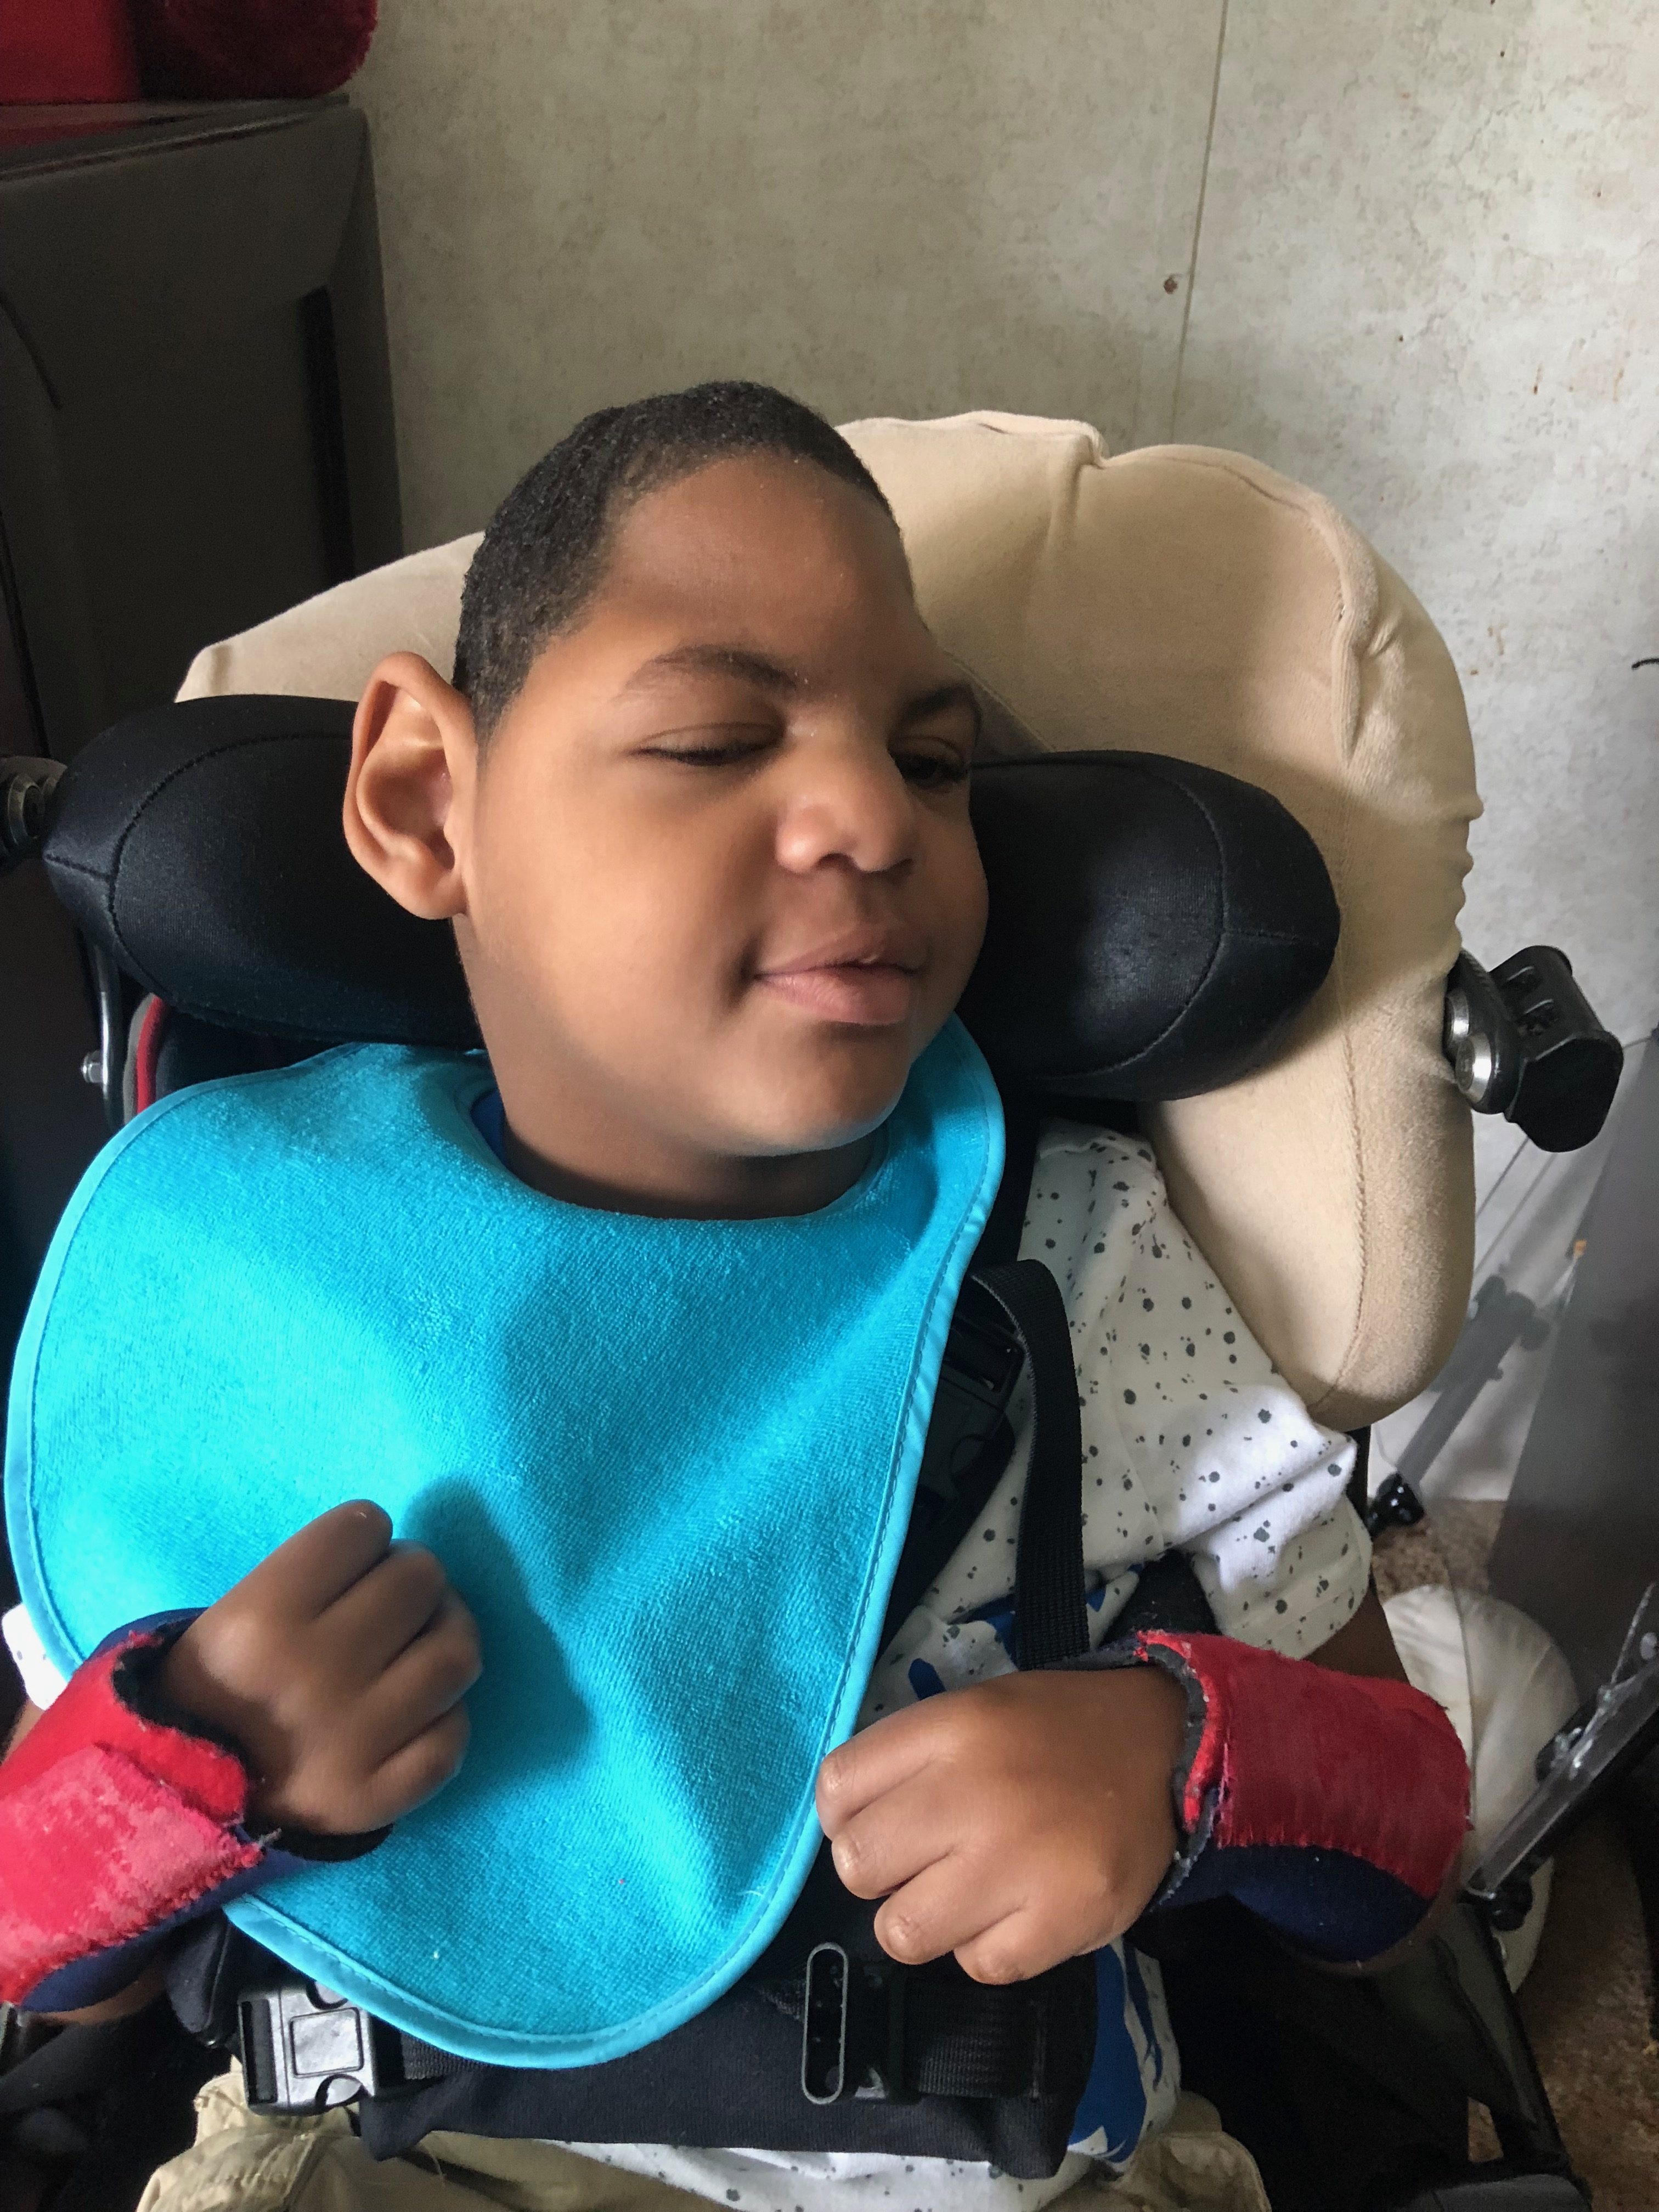 Boy with Cerebral Palsy Gets New Room